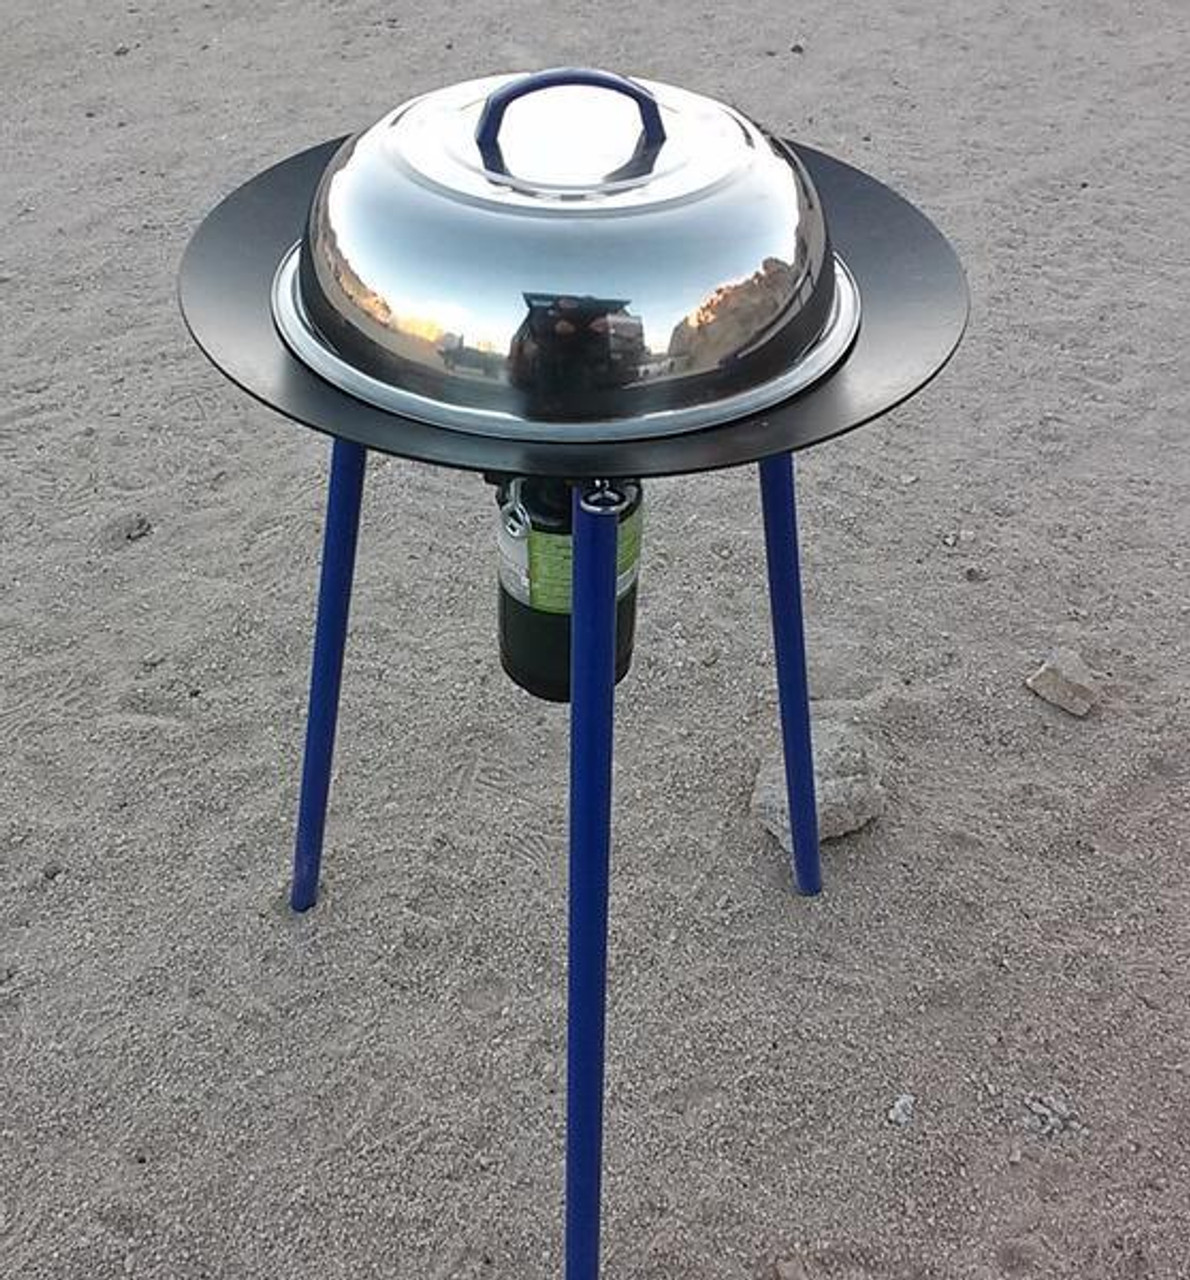 Adjustable Leg Skottle Grill Kit by Tembo Tusk for Sale in Highland Park,  CA - OfferUp